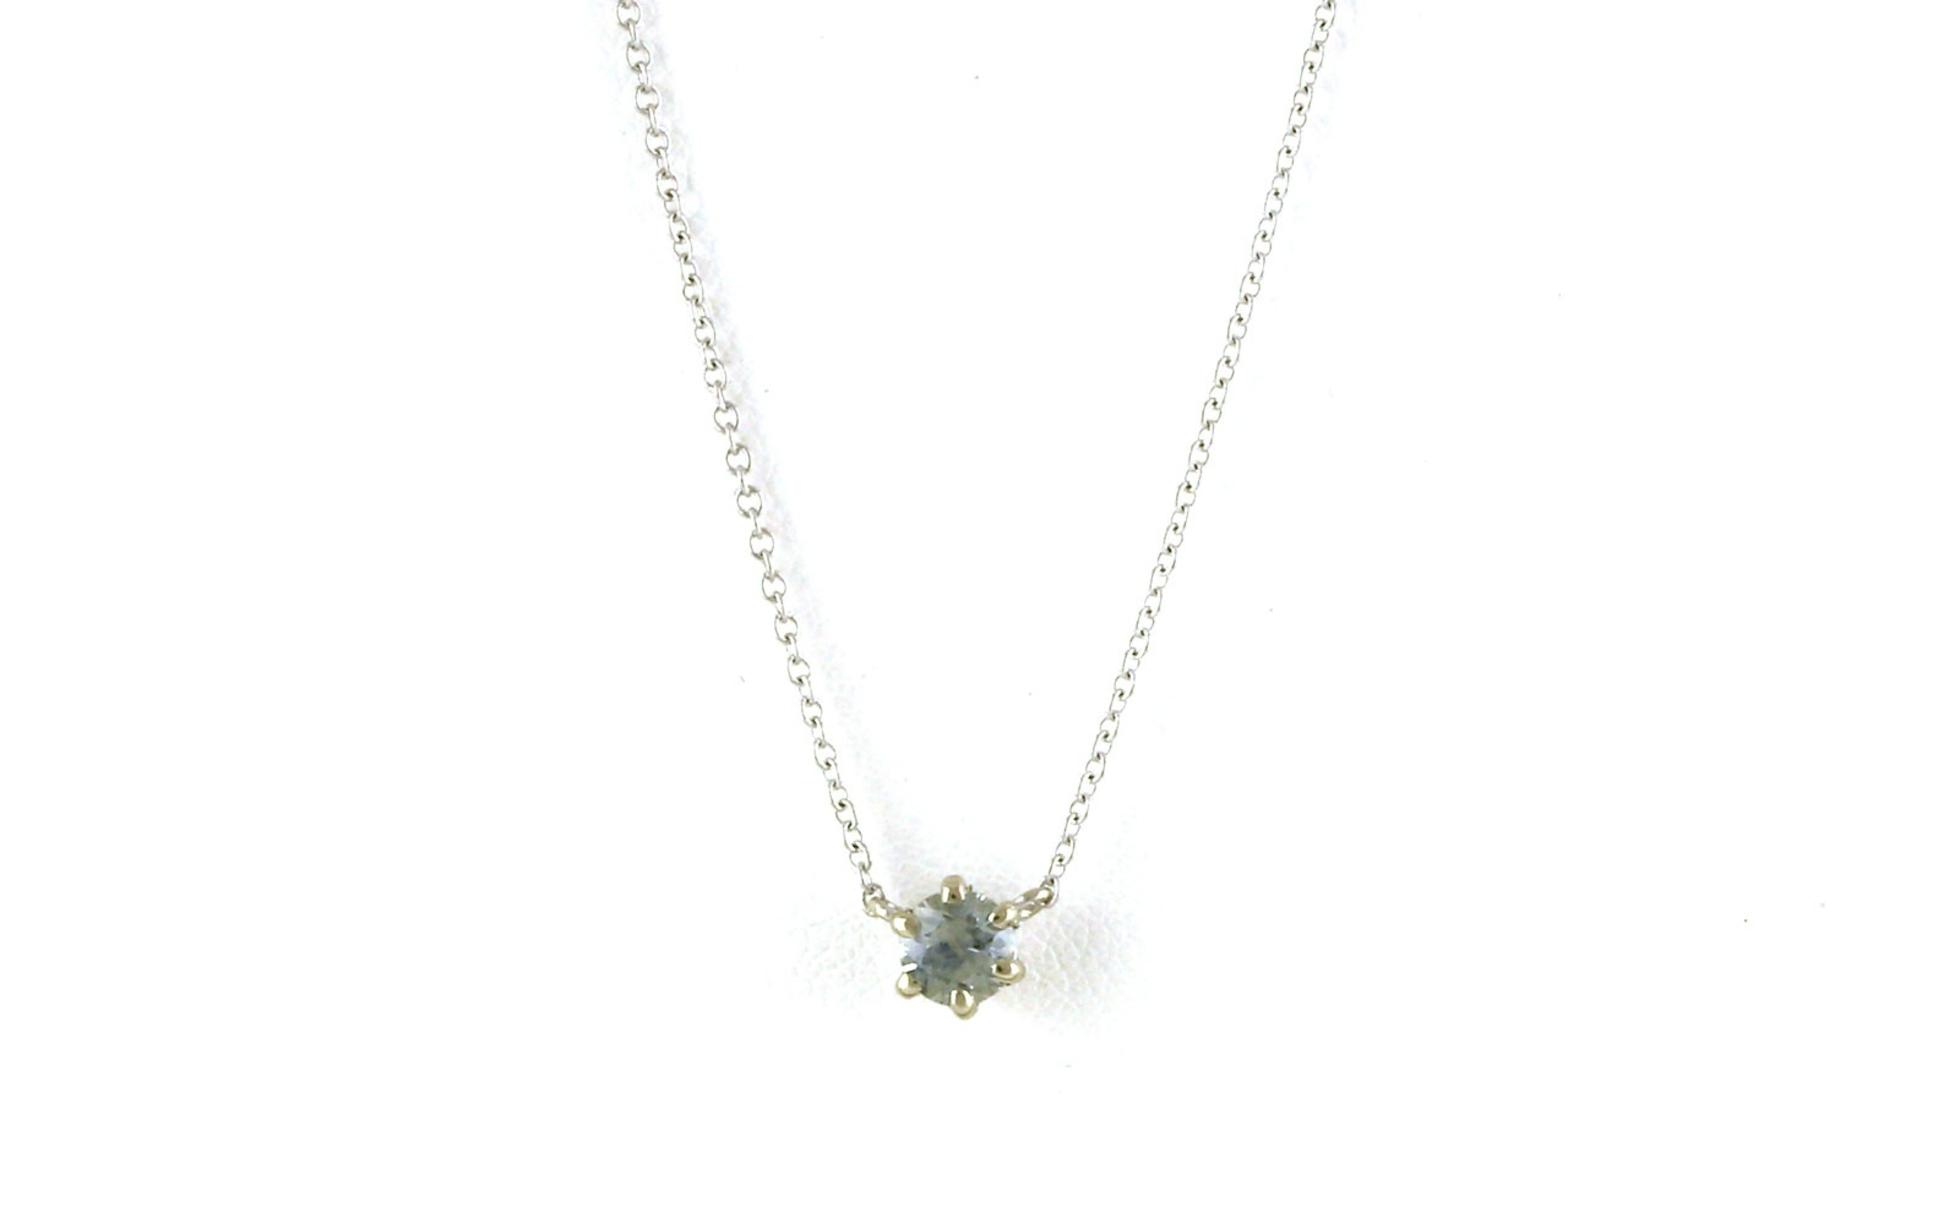 Solitaire-style Pale Grey-Blue Montana Sapphire Necklace on Split Chain in White Gold (0.44cts)